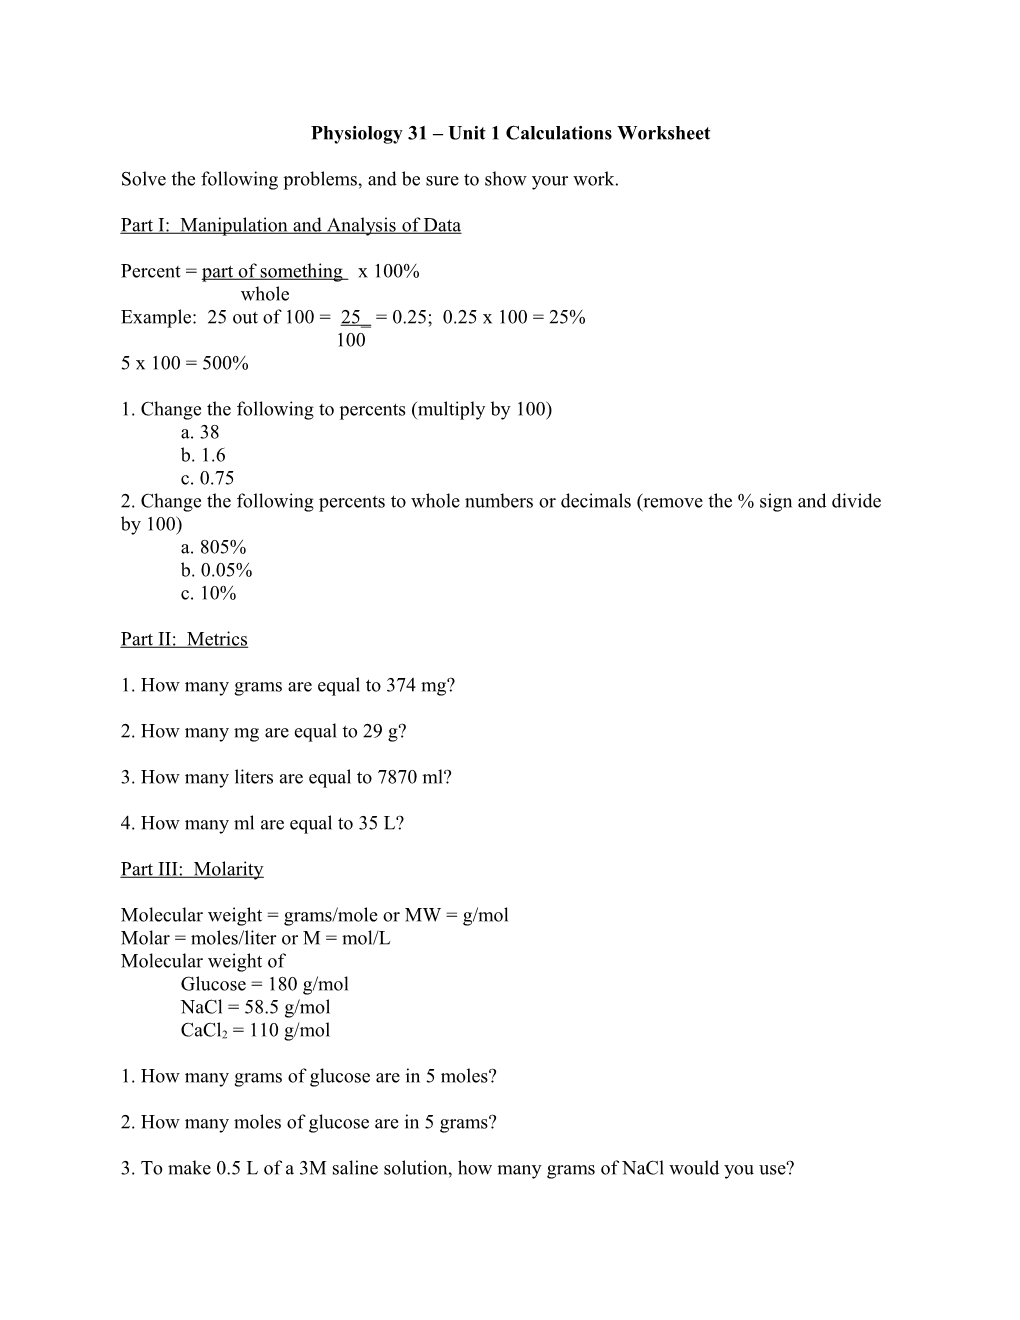 Physiology 31 Unit 1 Calculations Worksheet